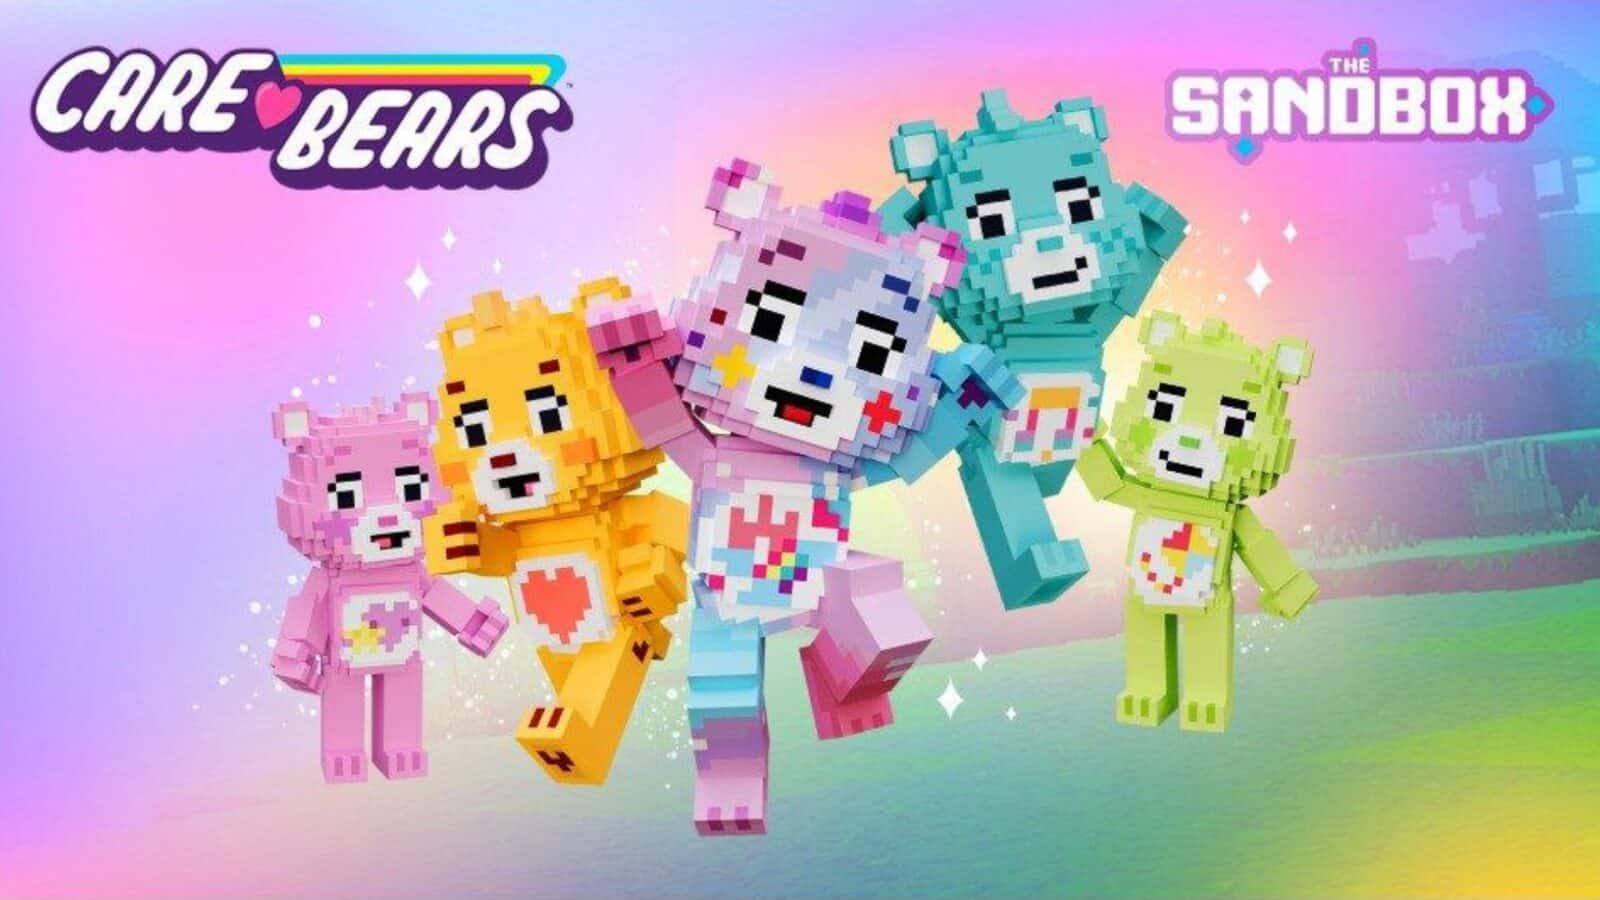 Care Bears Embrace The Sandbox to Connect with Fans in the Metaverse